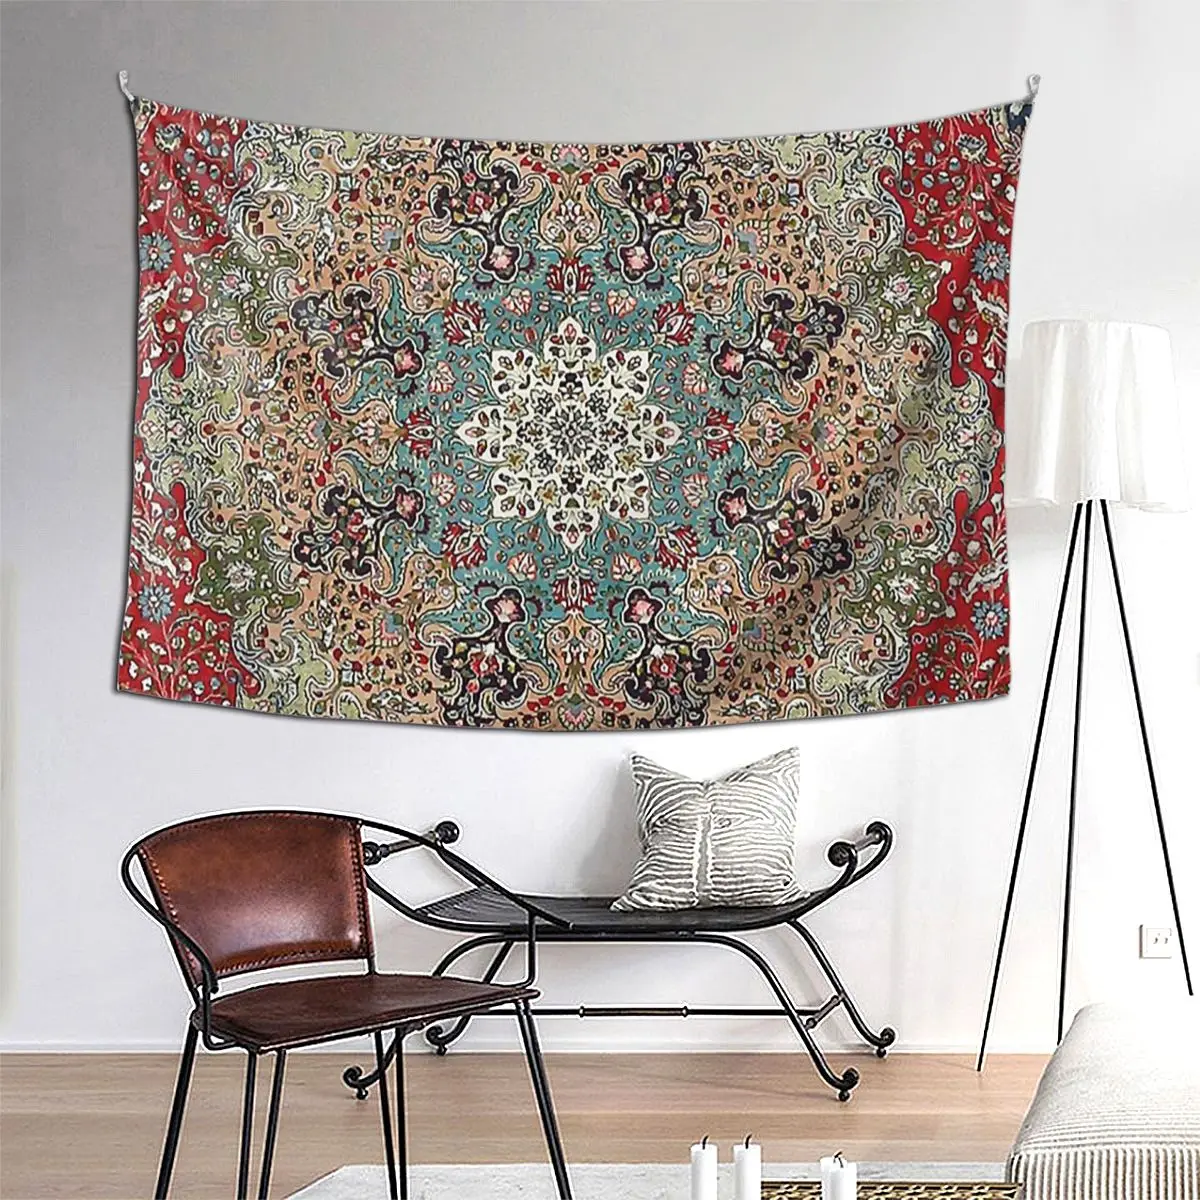 

Vintage Antique Persian Carpet Print Tapestry Hippie Wall Hanging Aesthetic Home Decor Tapestries for Living Room Bedroom Dorm